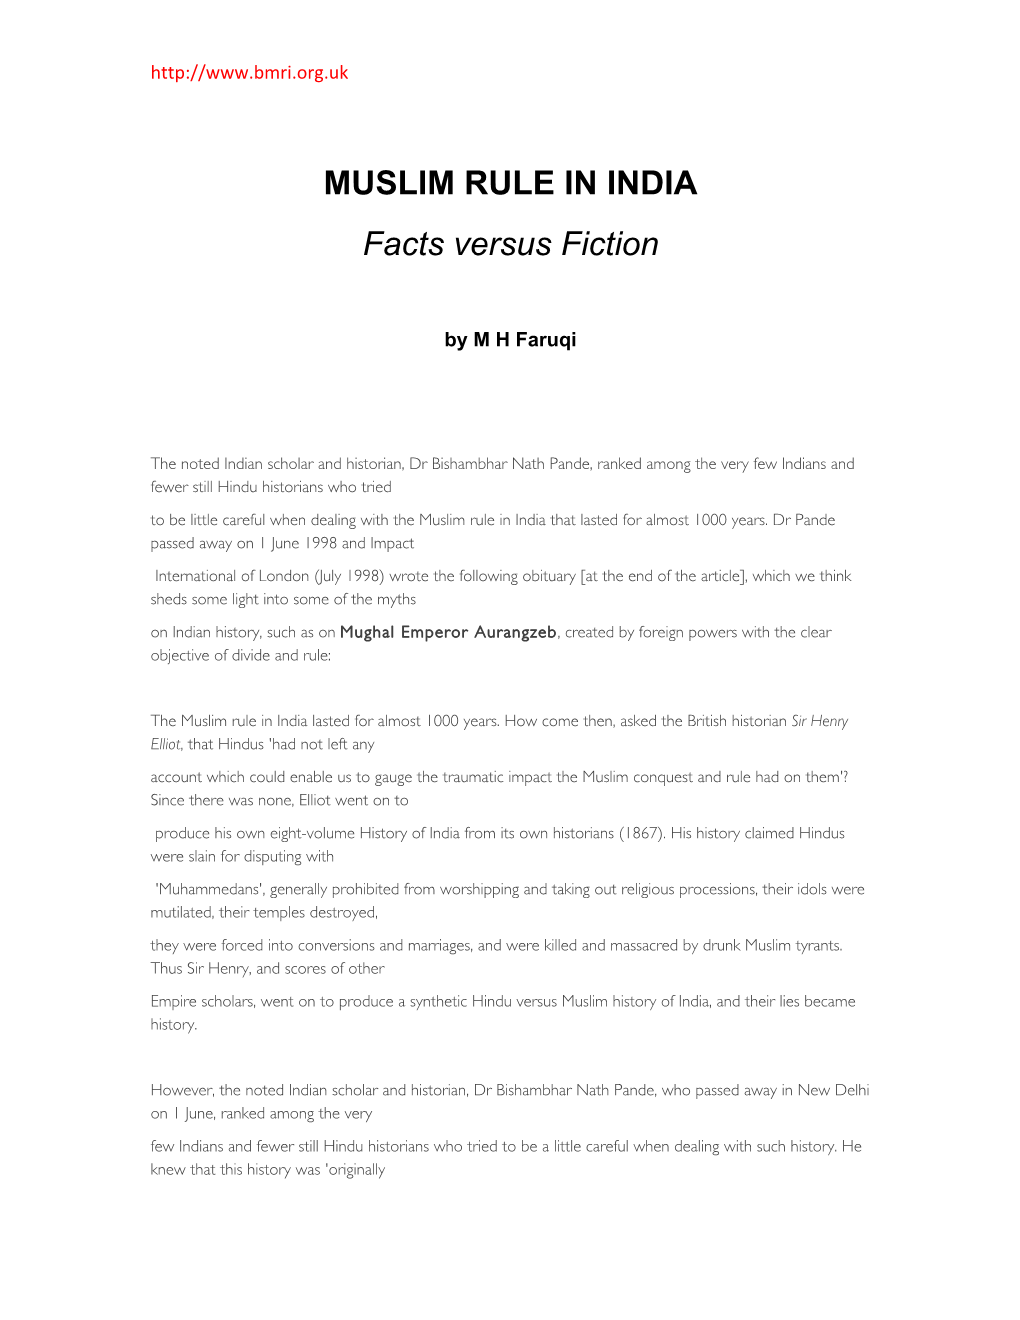 MUSLIM RULE in INDIA Facts Versus Fiction